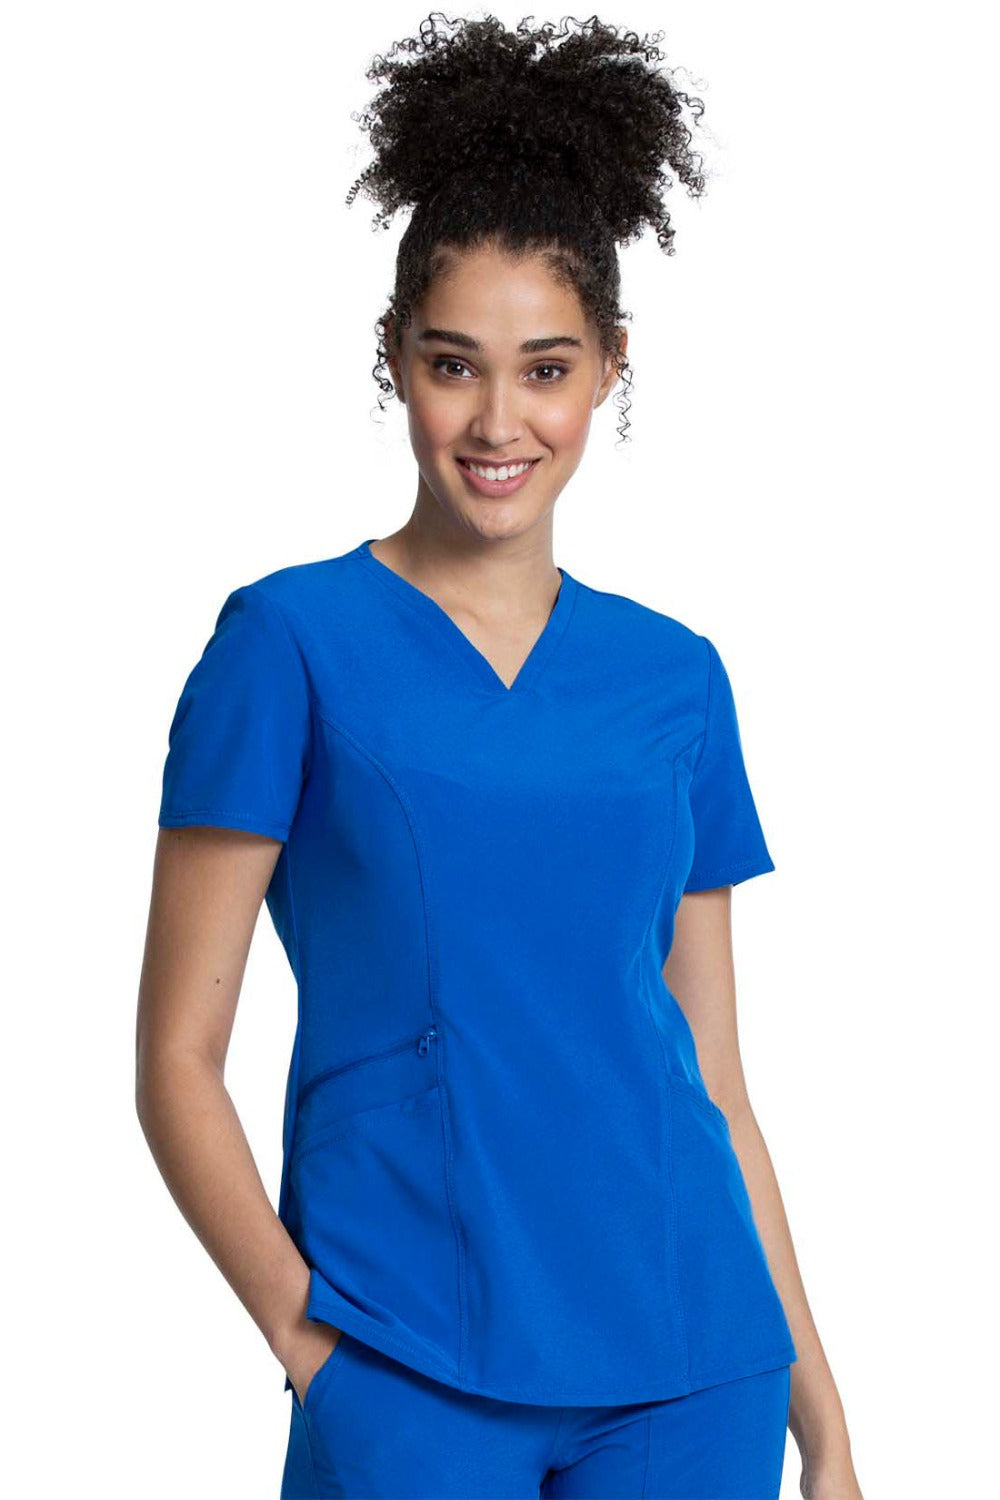 Cherokee Allura V-Neck Scrub Top in Royal at Parker's Clothing and Shoes.